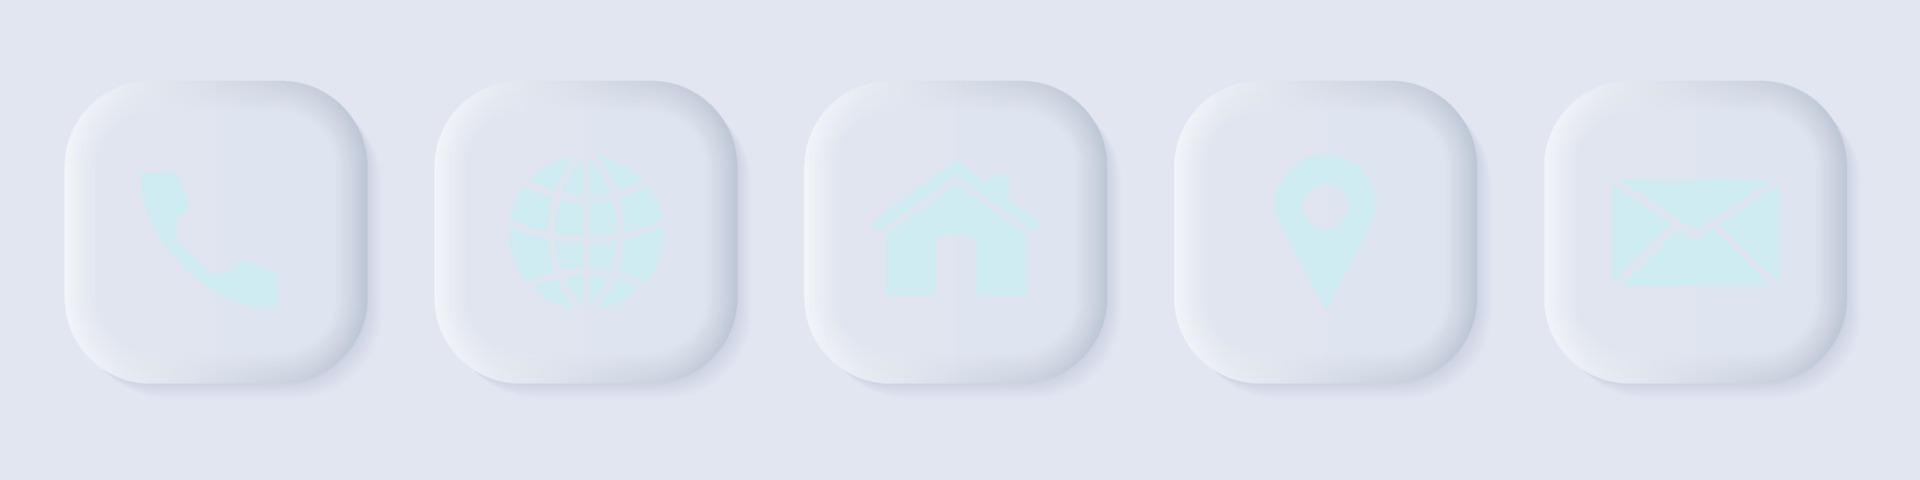 Different type of modern UI button set vector